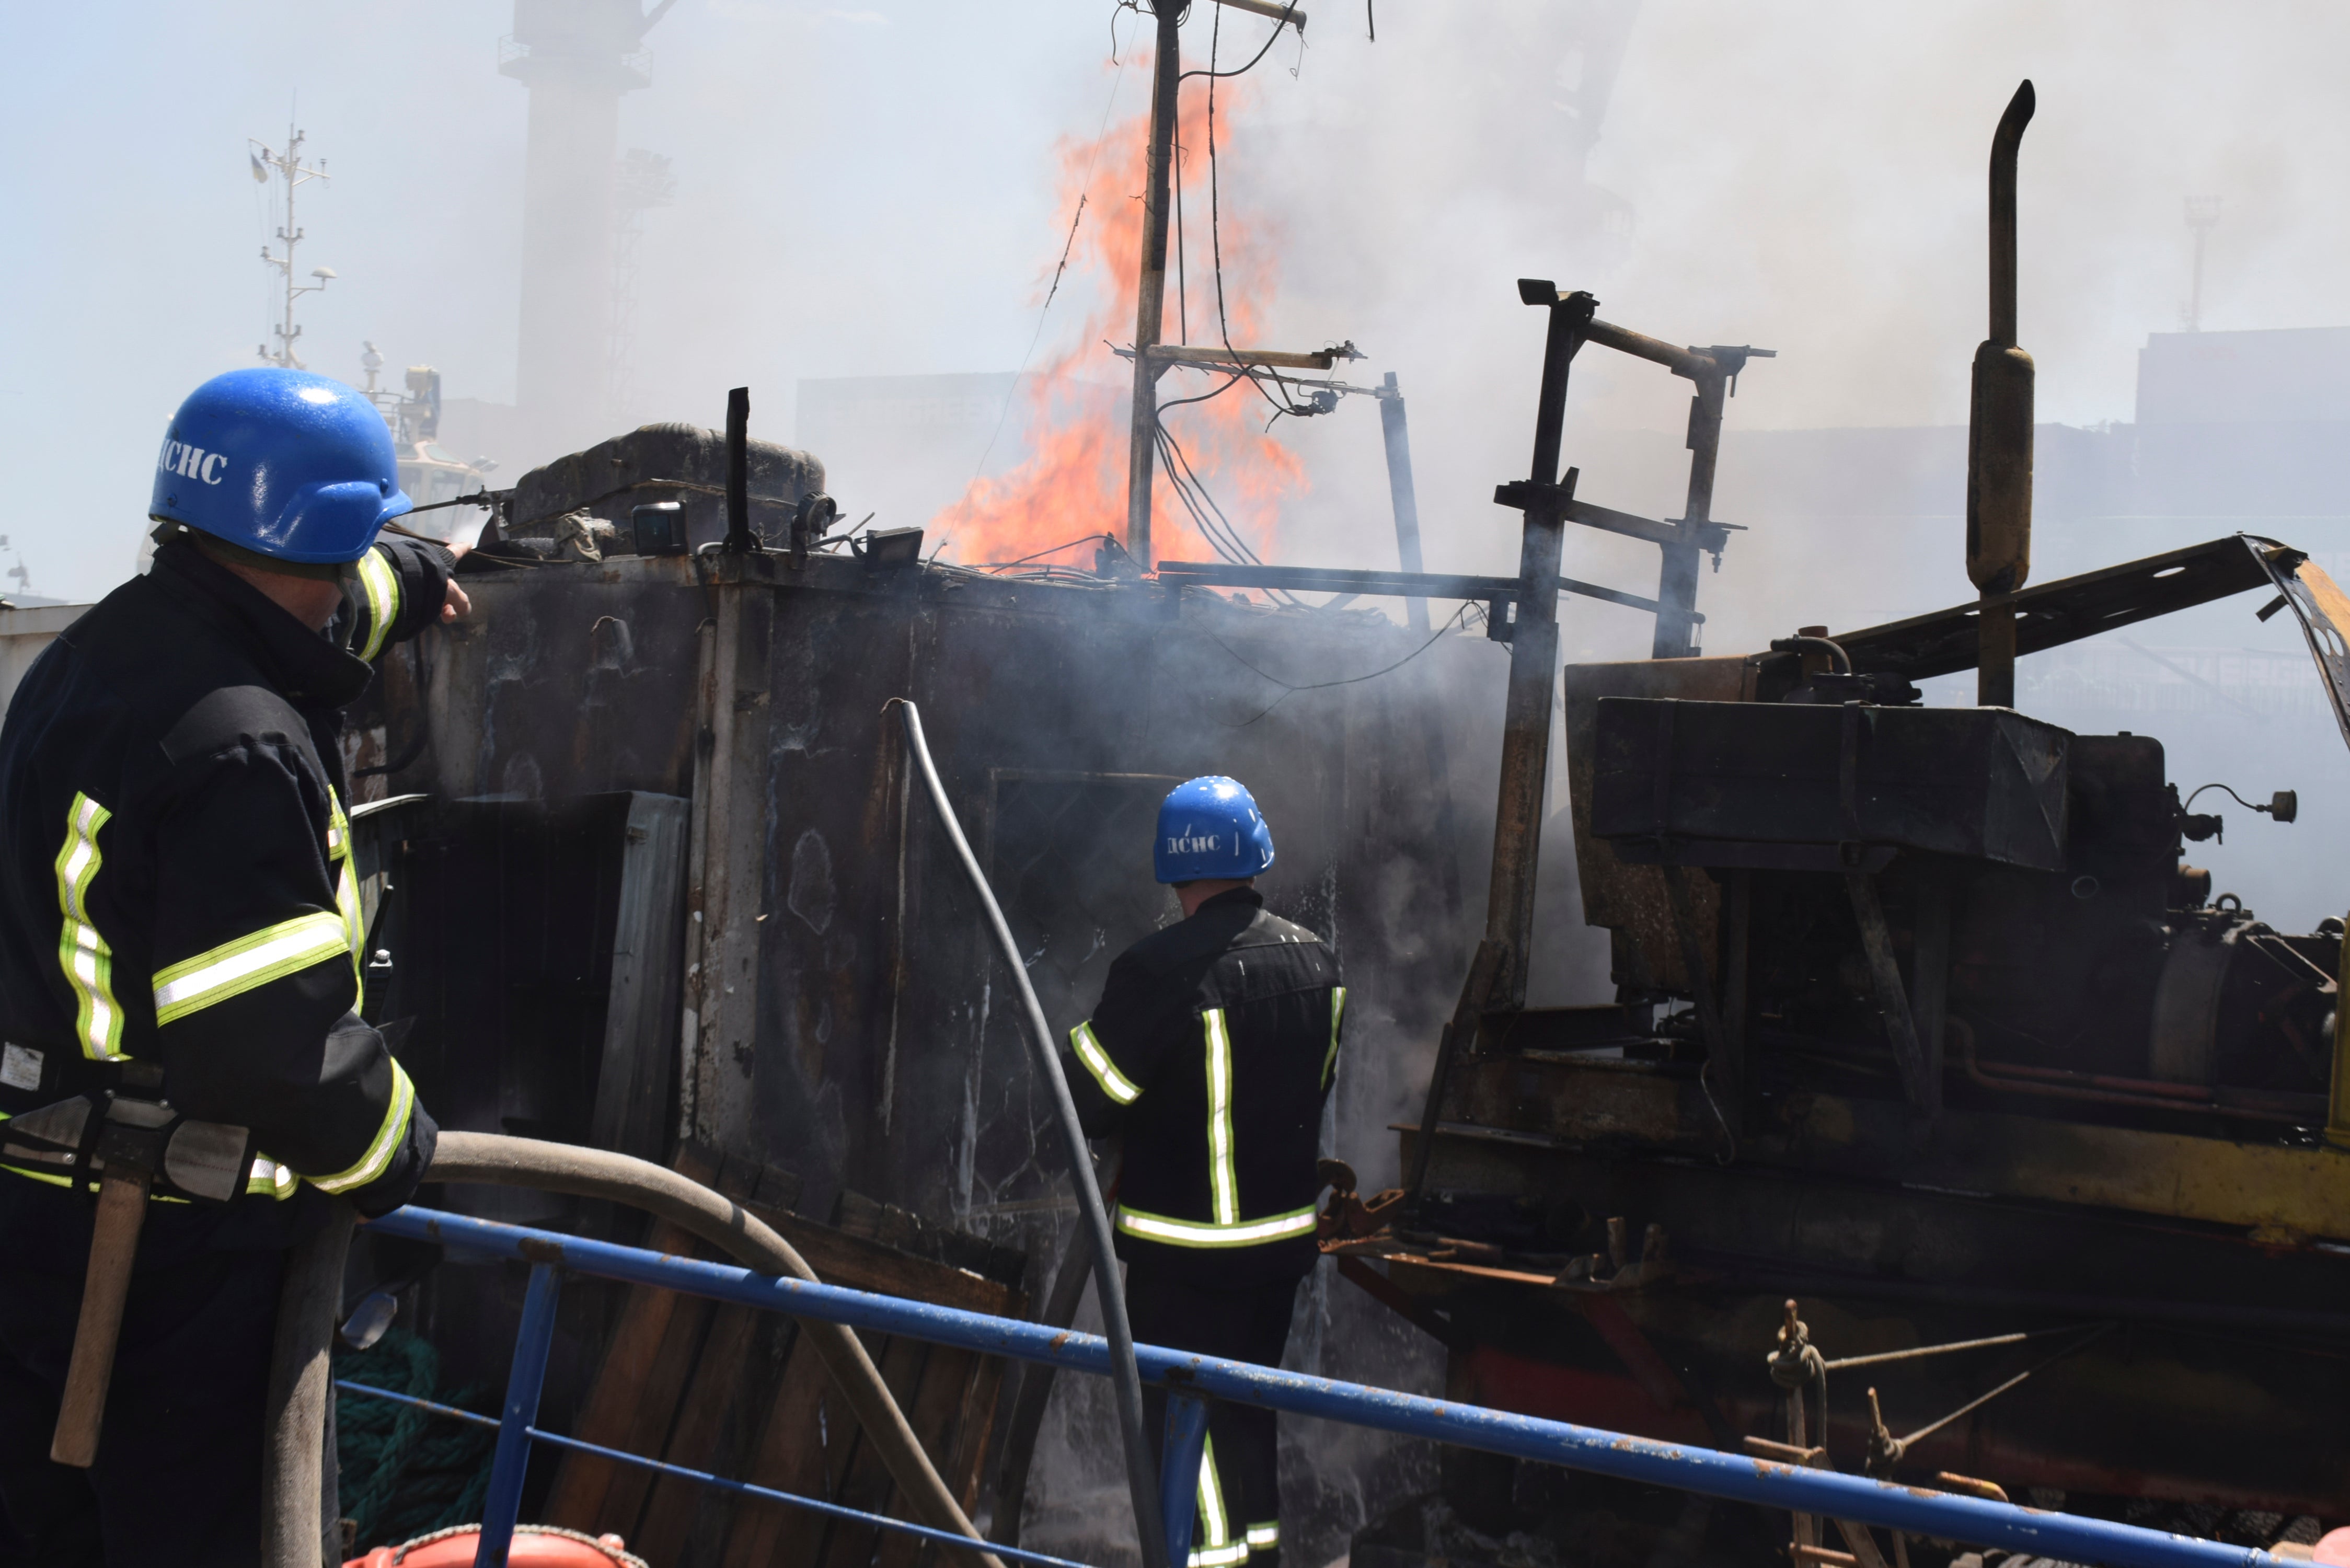 Odesa firefighters battle a port blaze after a Russian missile attack on Saturday